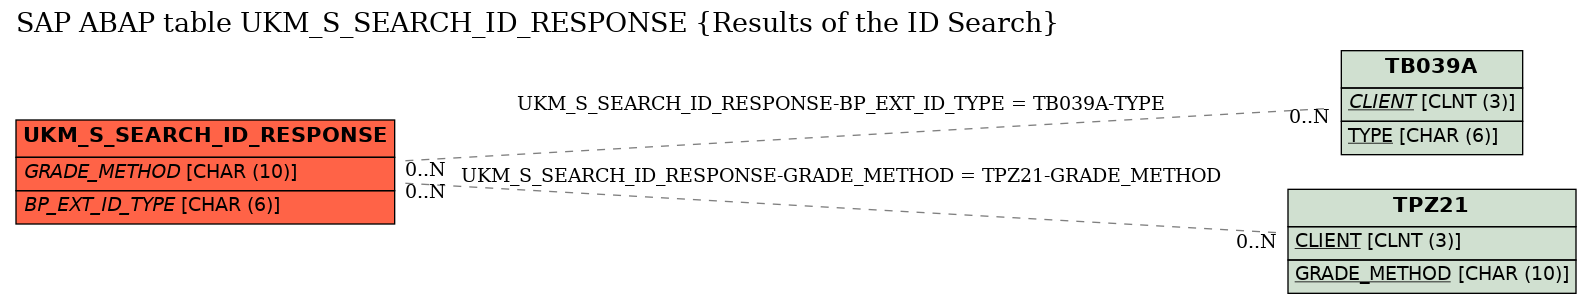 E-R Diagram for table UKM_S_SEARCH_ID_RESPONSE (Results of the ID Search)